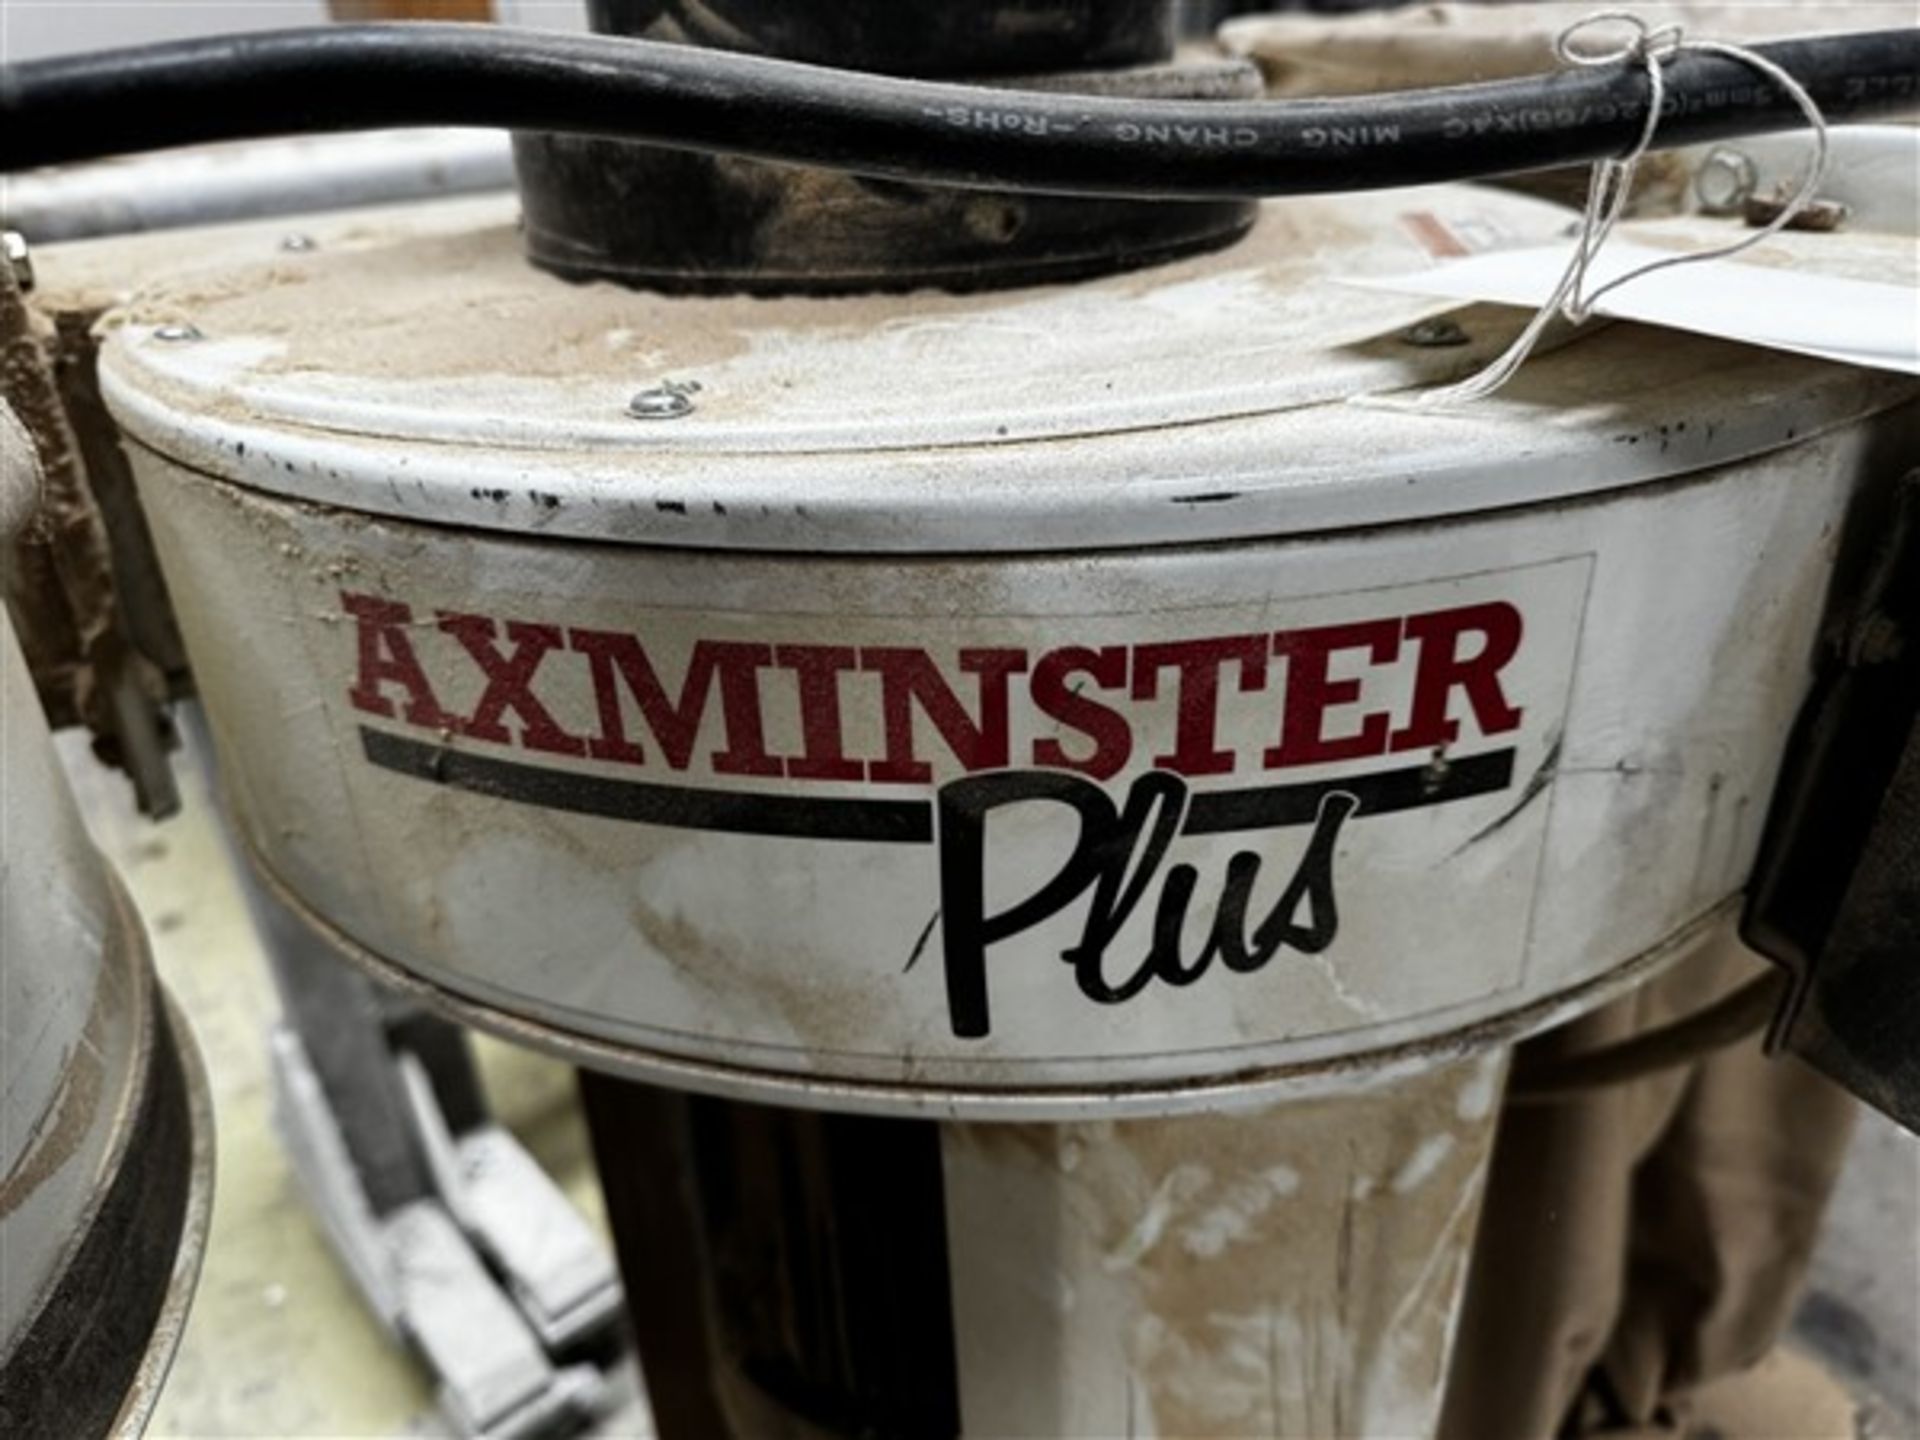 Axminster Plus twin bag dust extraction unit, model 810389 - Image 2 of 6